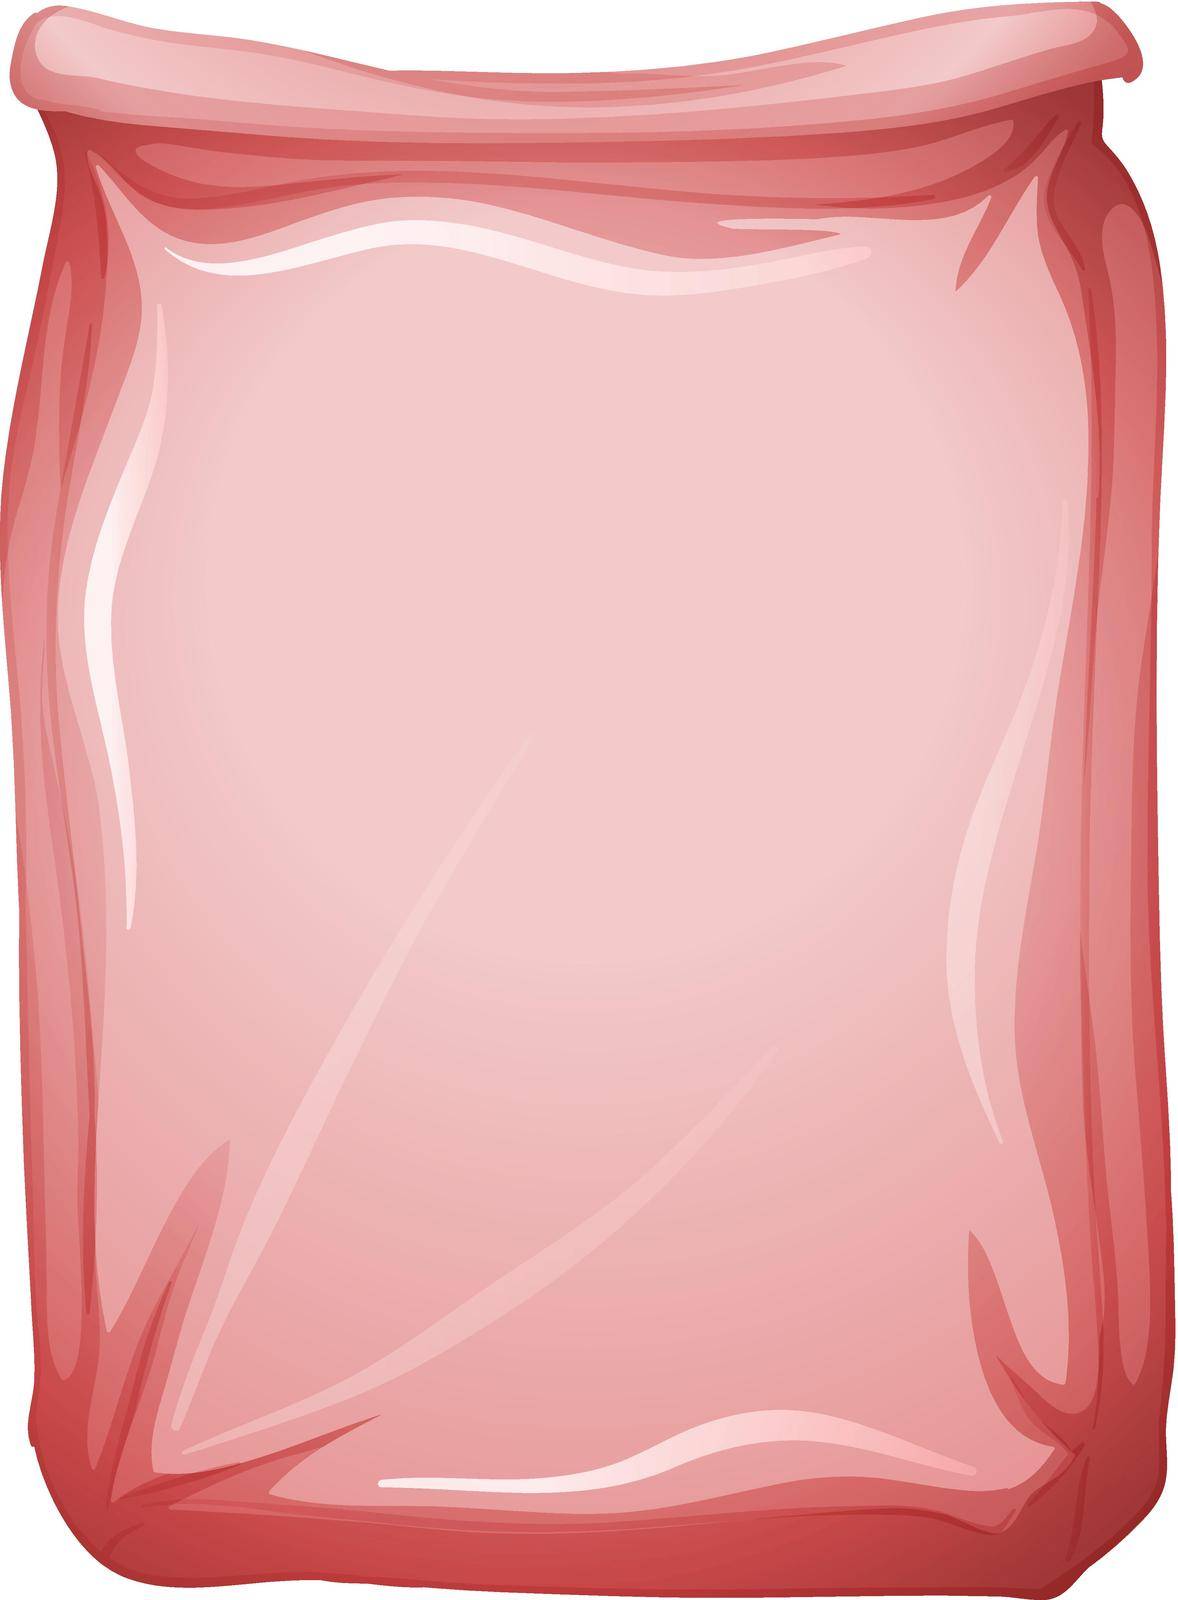 Illustration of a pink bag on a white background